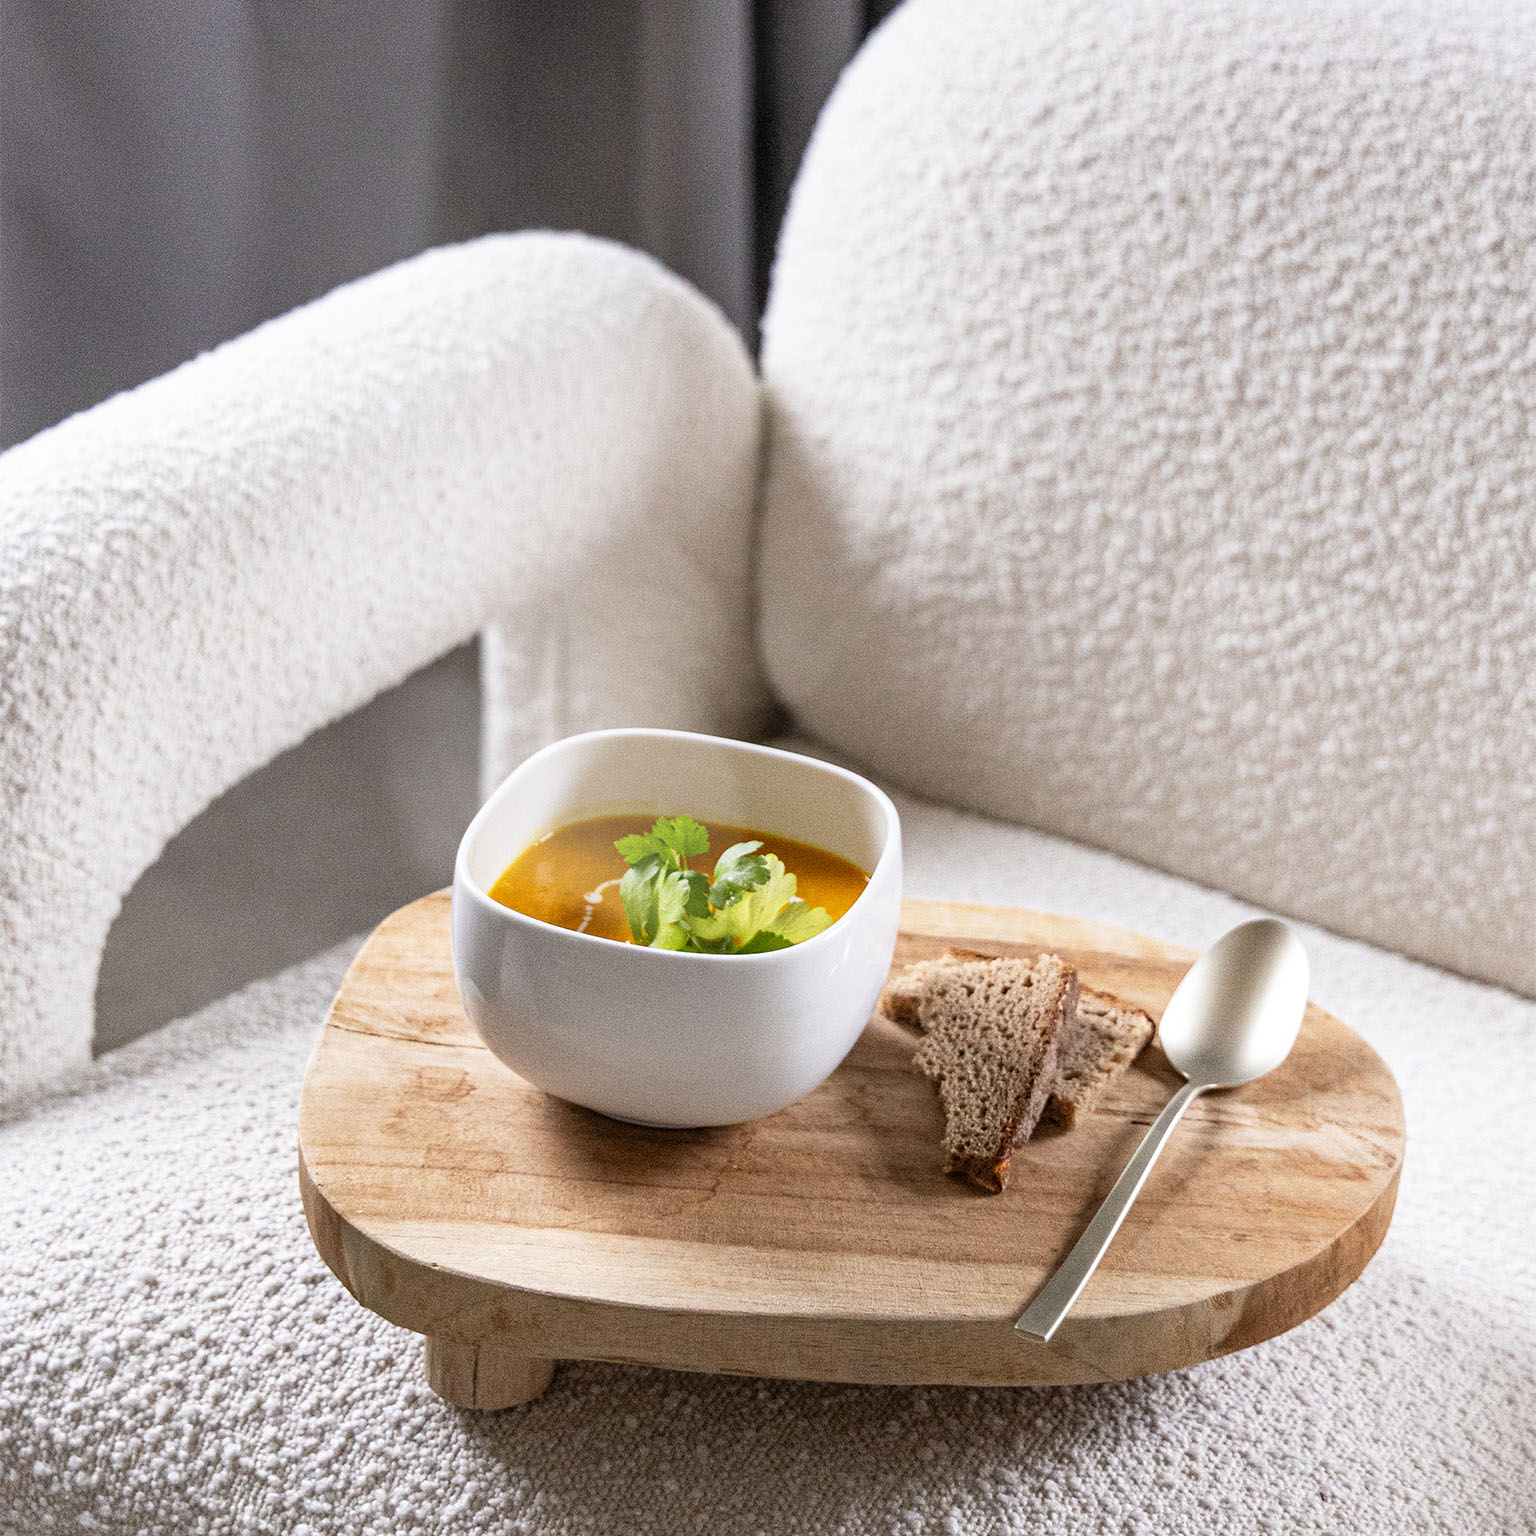 Rosenthal Suomi soup bowl filled with pumpkin soup on a wooden tray placed on a couch